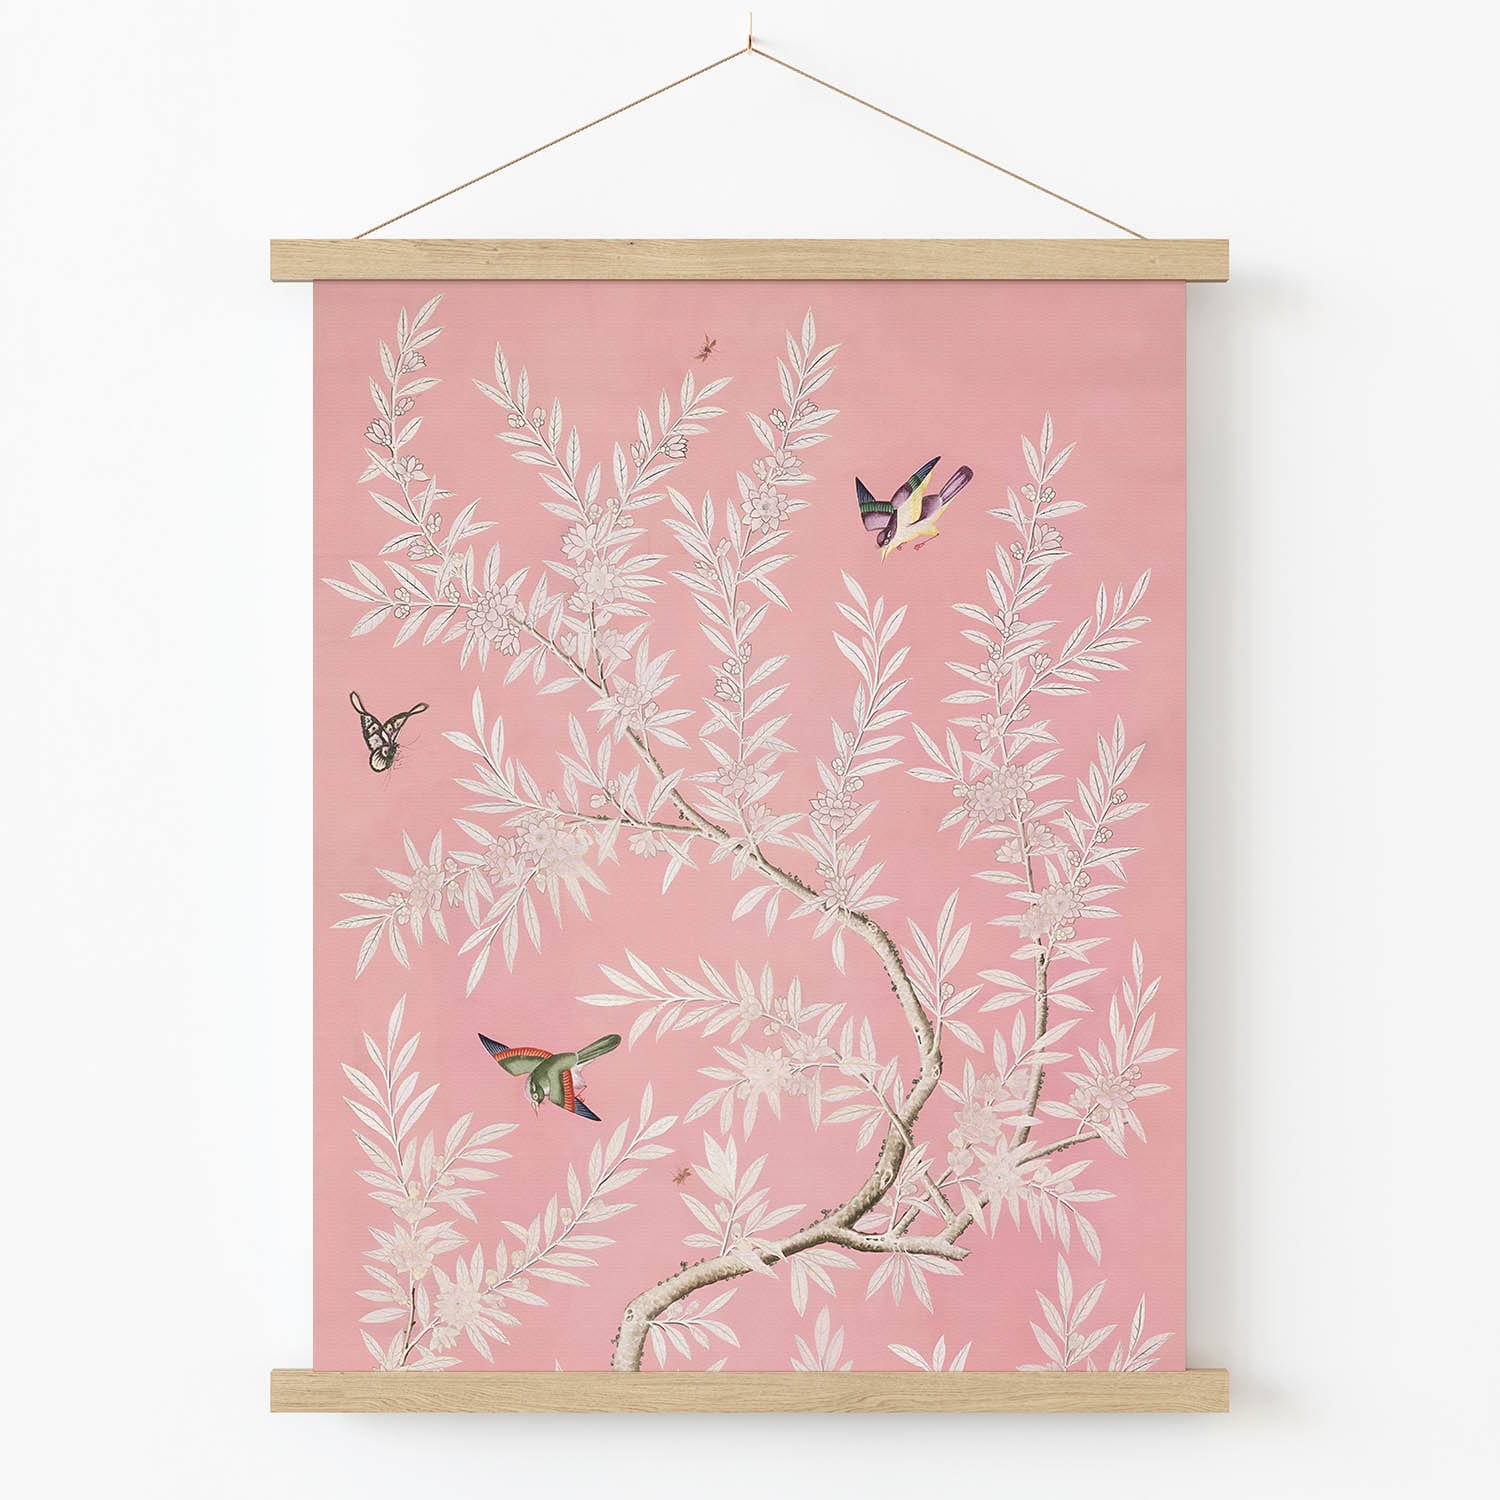 Pink Floral Art Print in Wood Hanger Frame on Wall